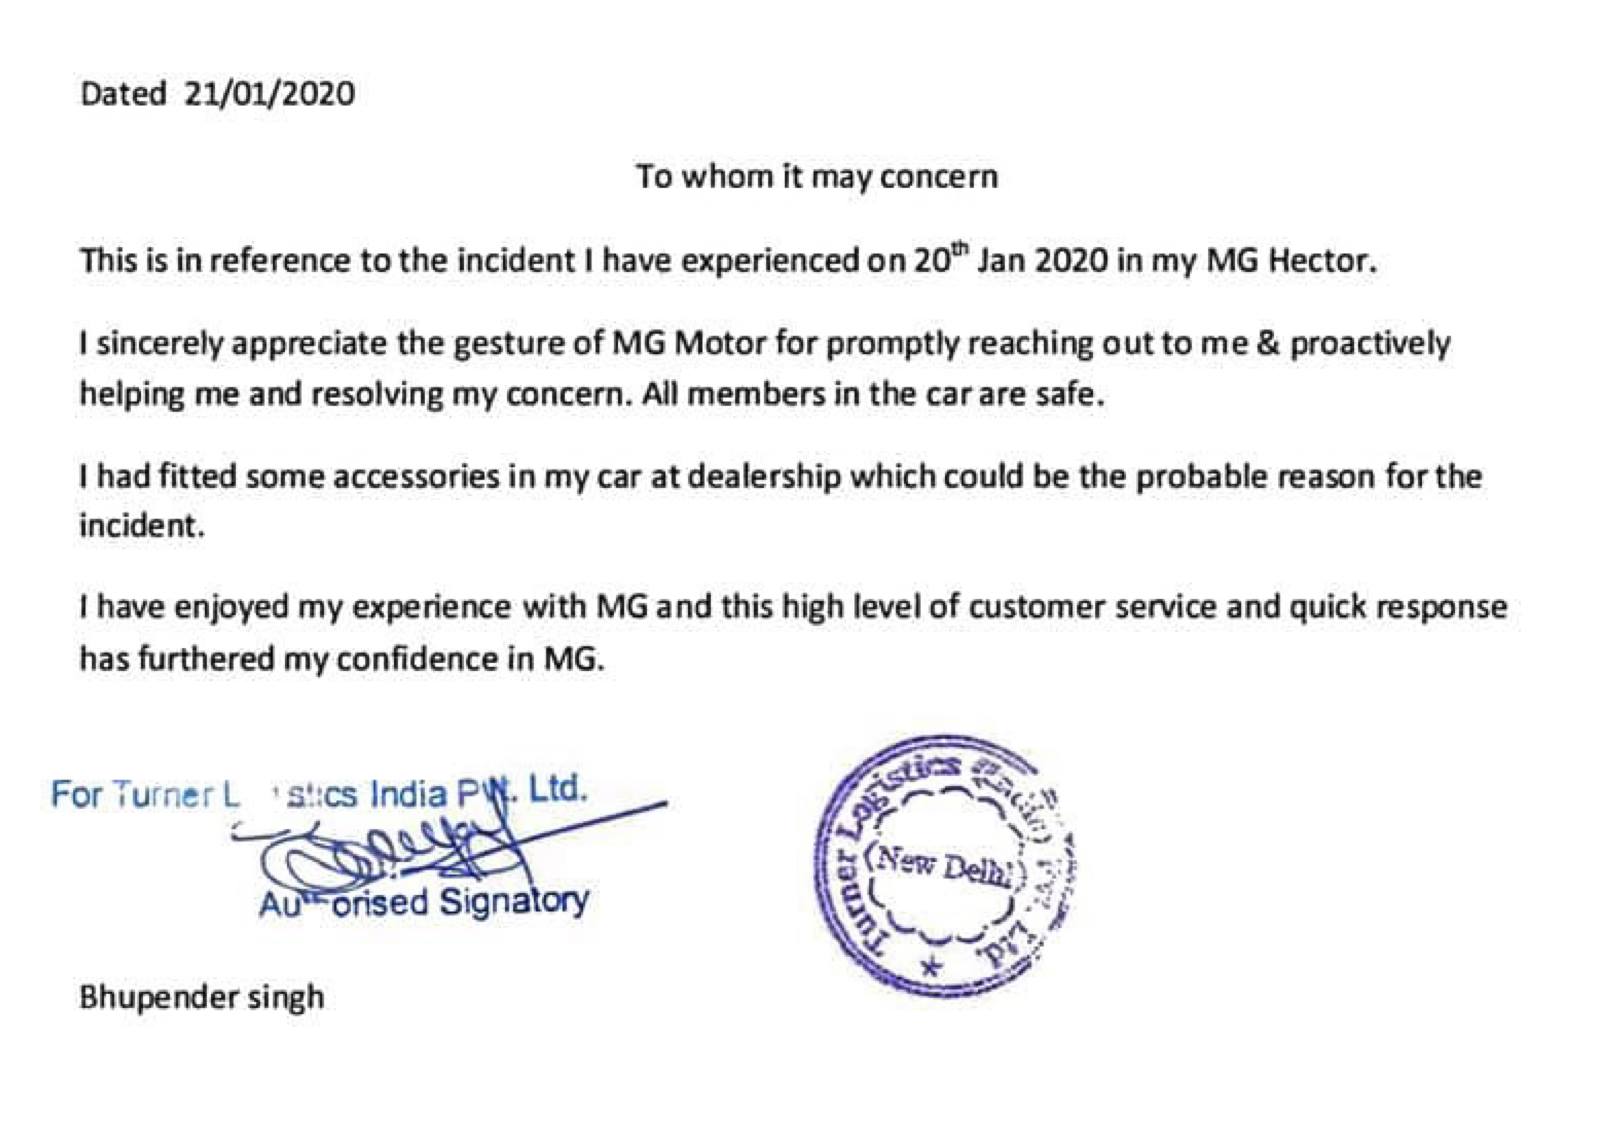 MG Hector fire incident